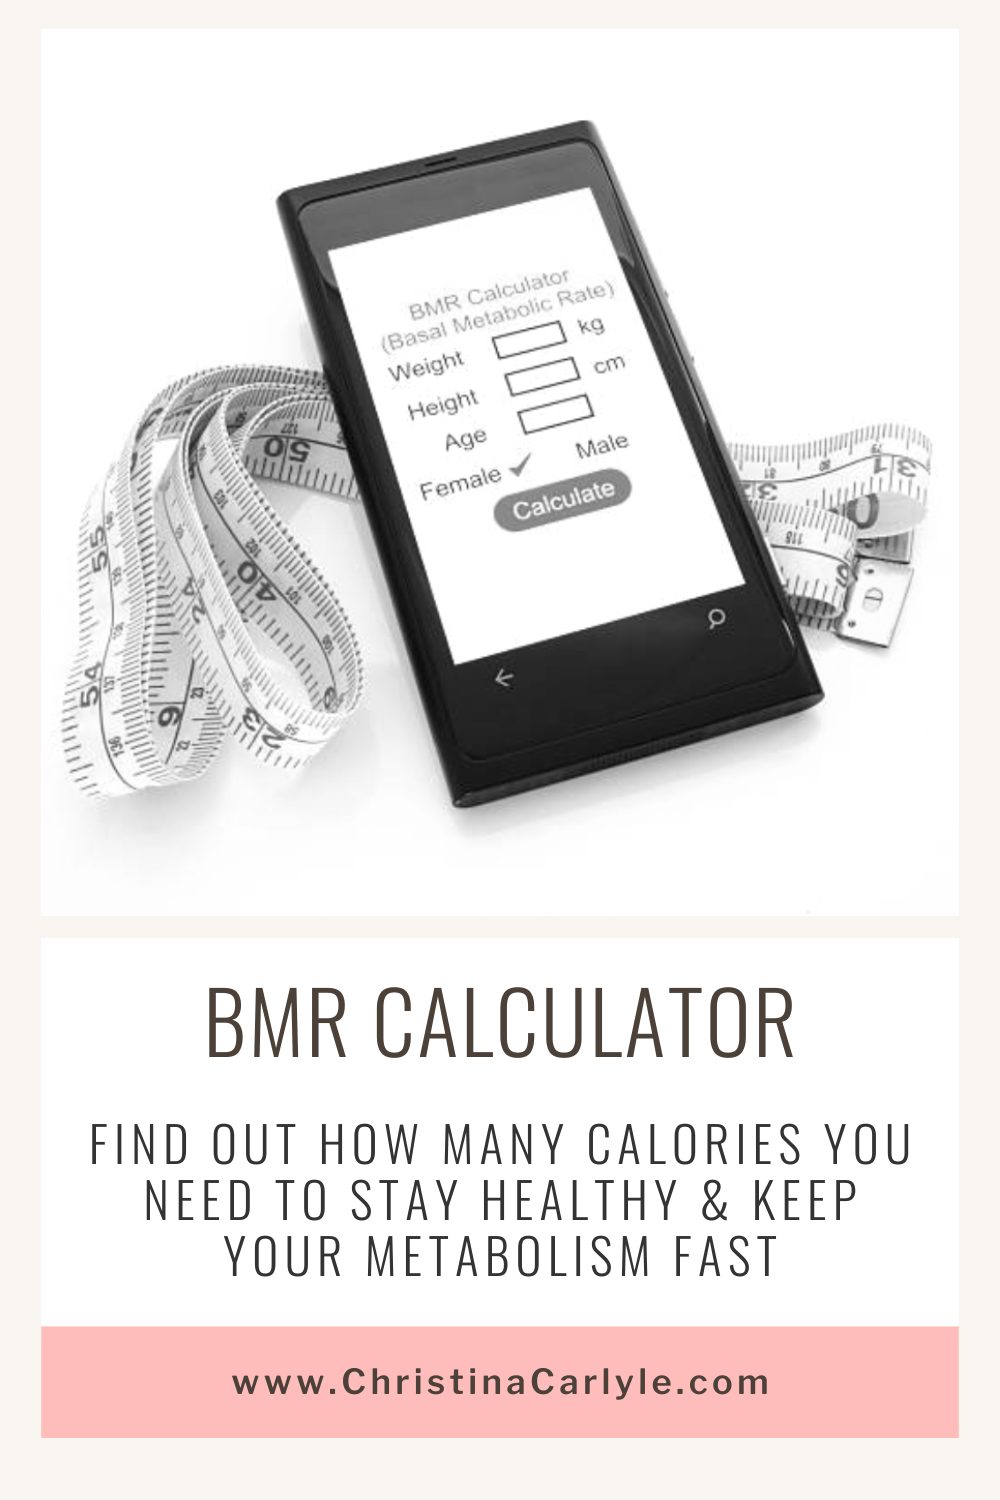 A picture of a BMR calculator and text that says BMR Calculator